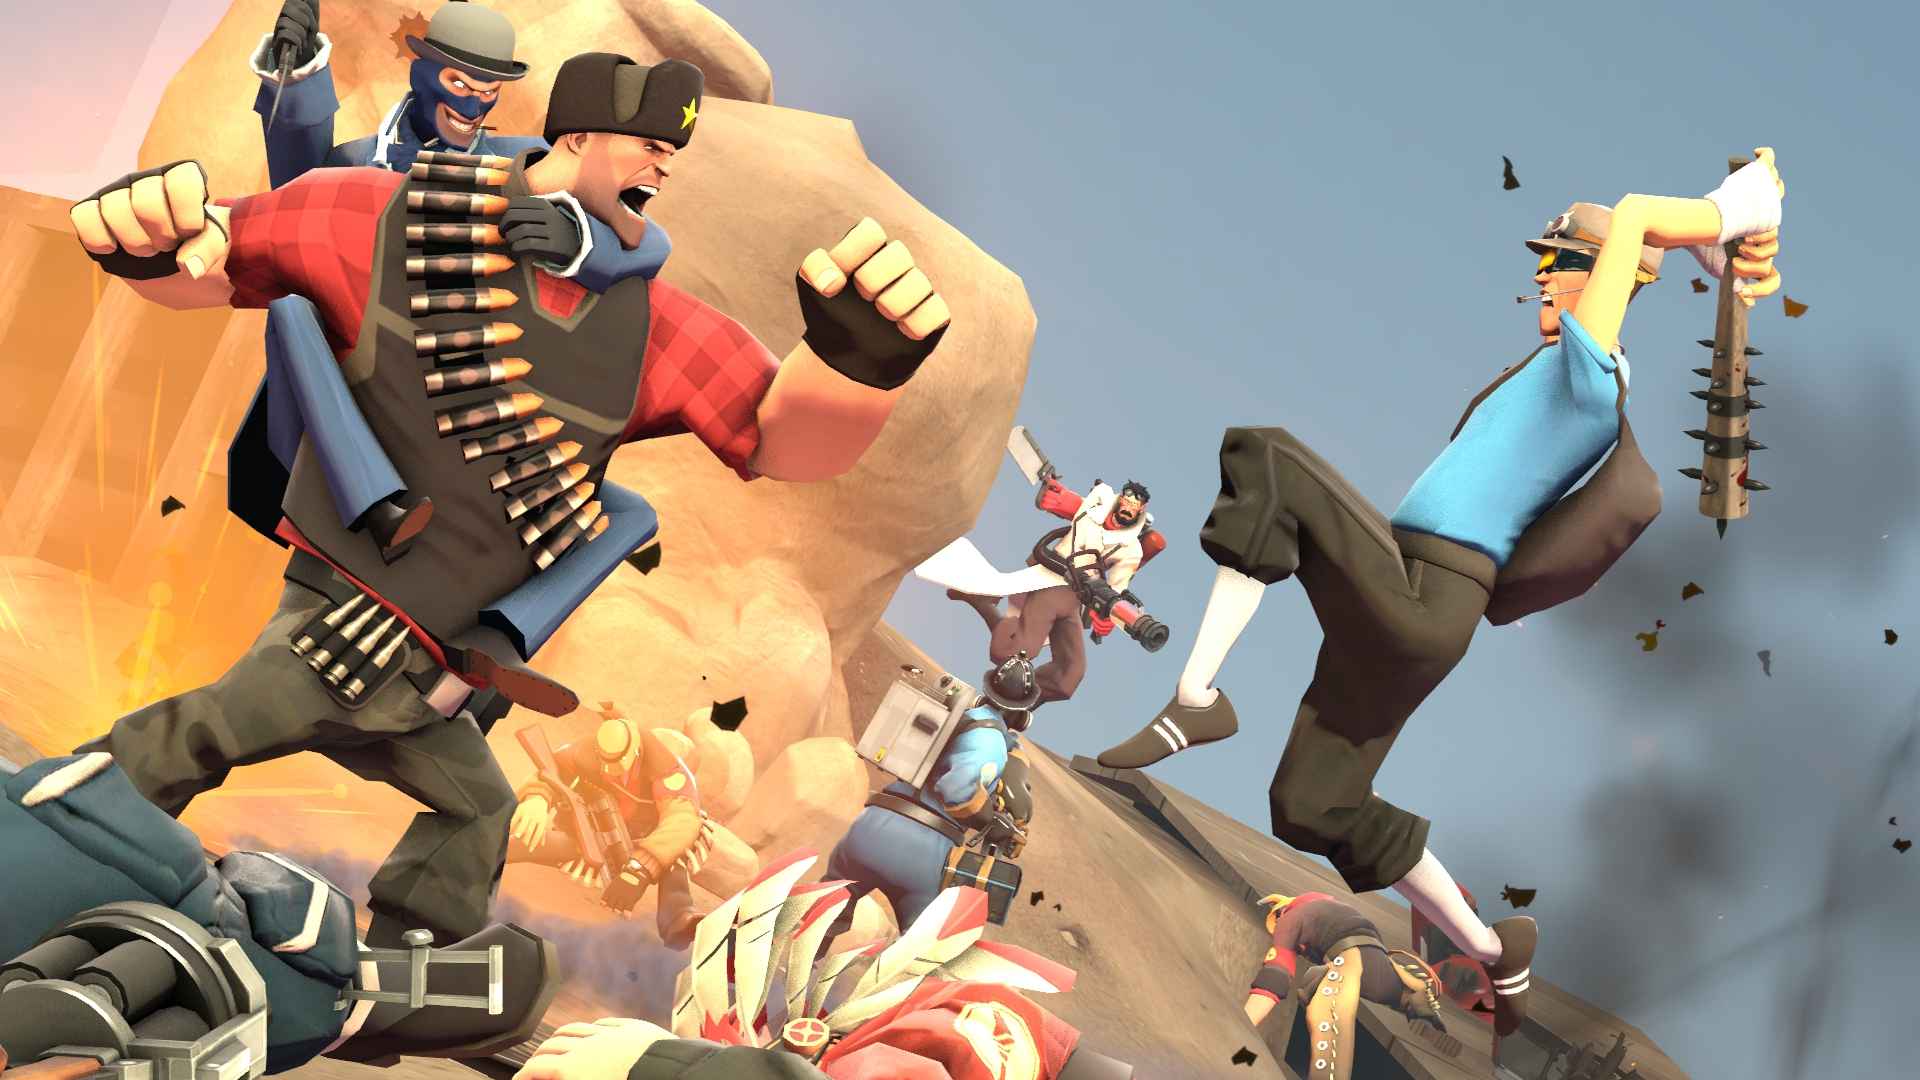 Valve adds Team fortress 2 Summer update after years